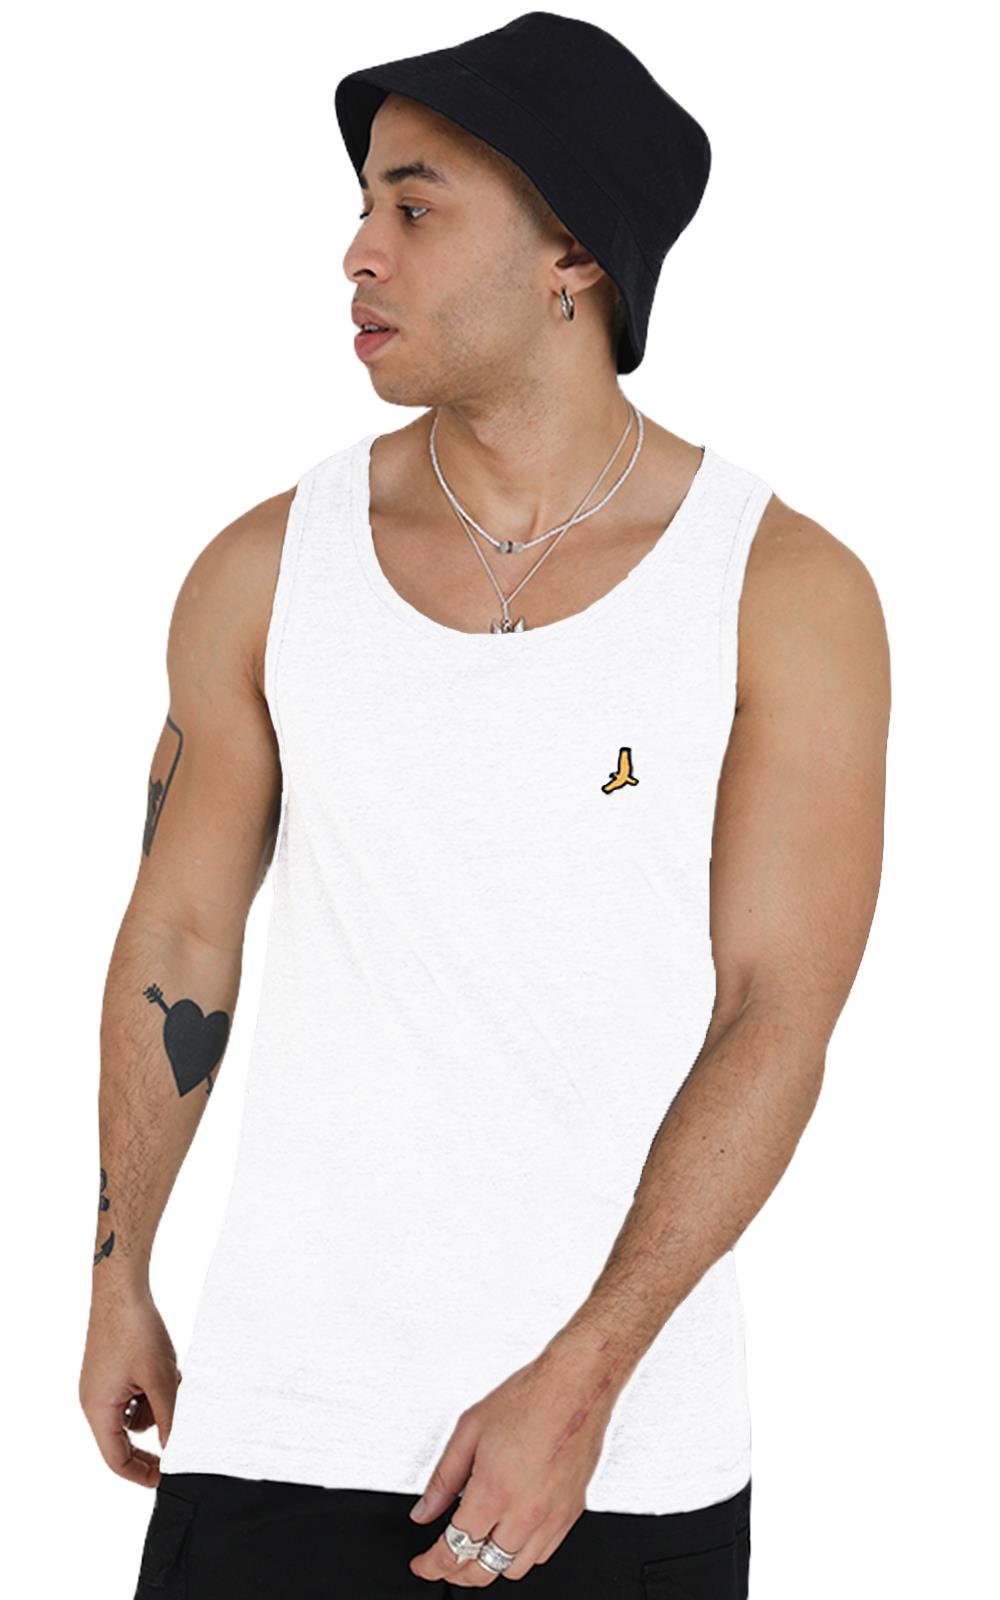 Men's Cotton Sleeveless Top - Pack of 3